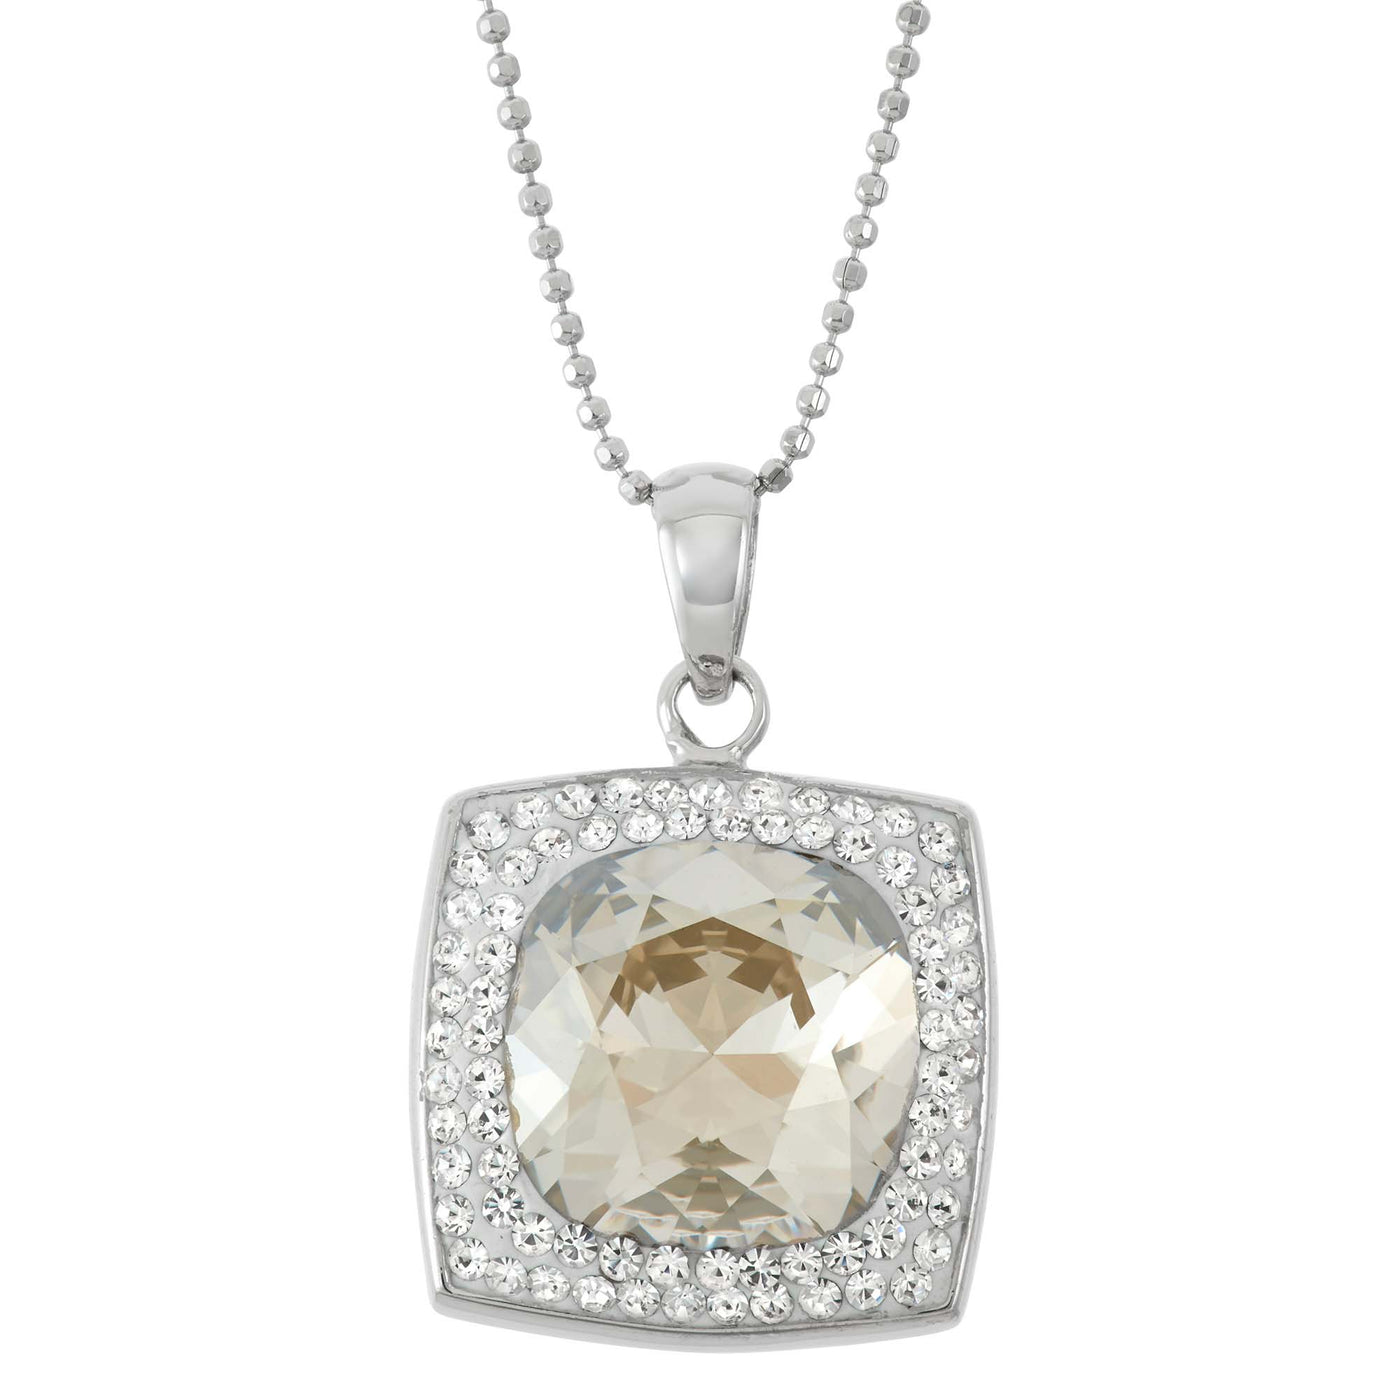 Rebecca Sloane Silver Pendant With Silver Shade And Clear Crystal